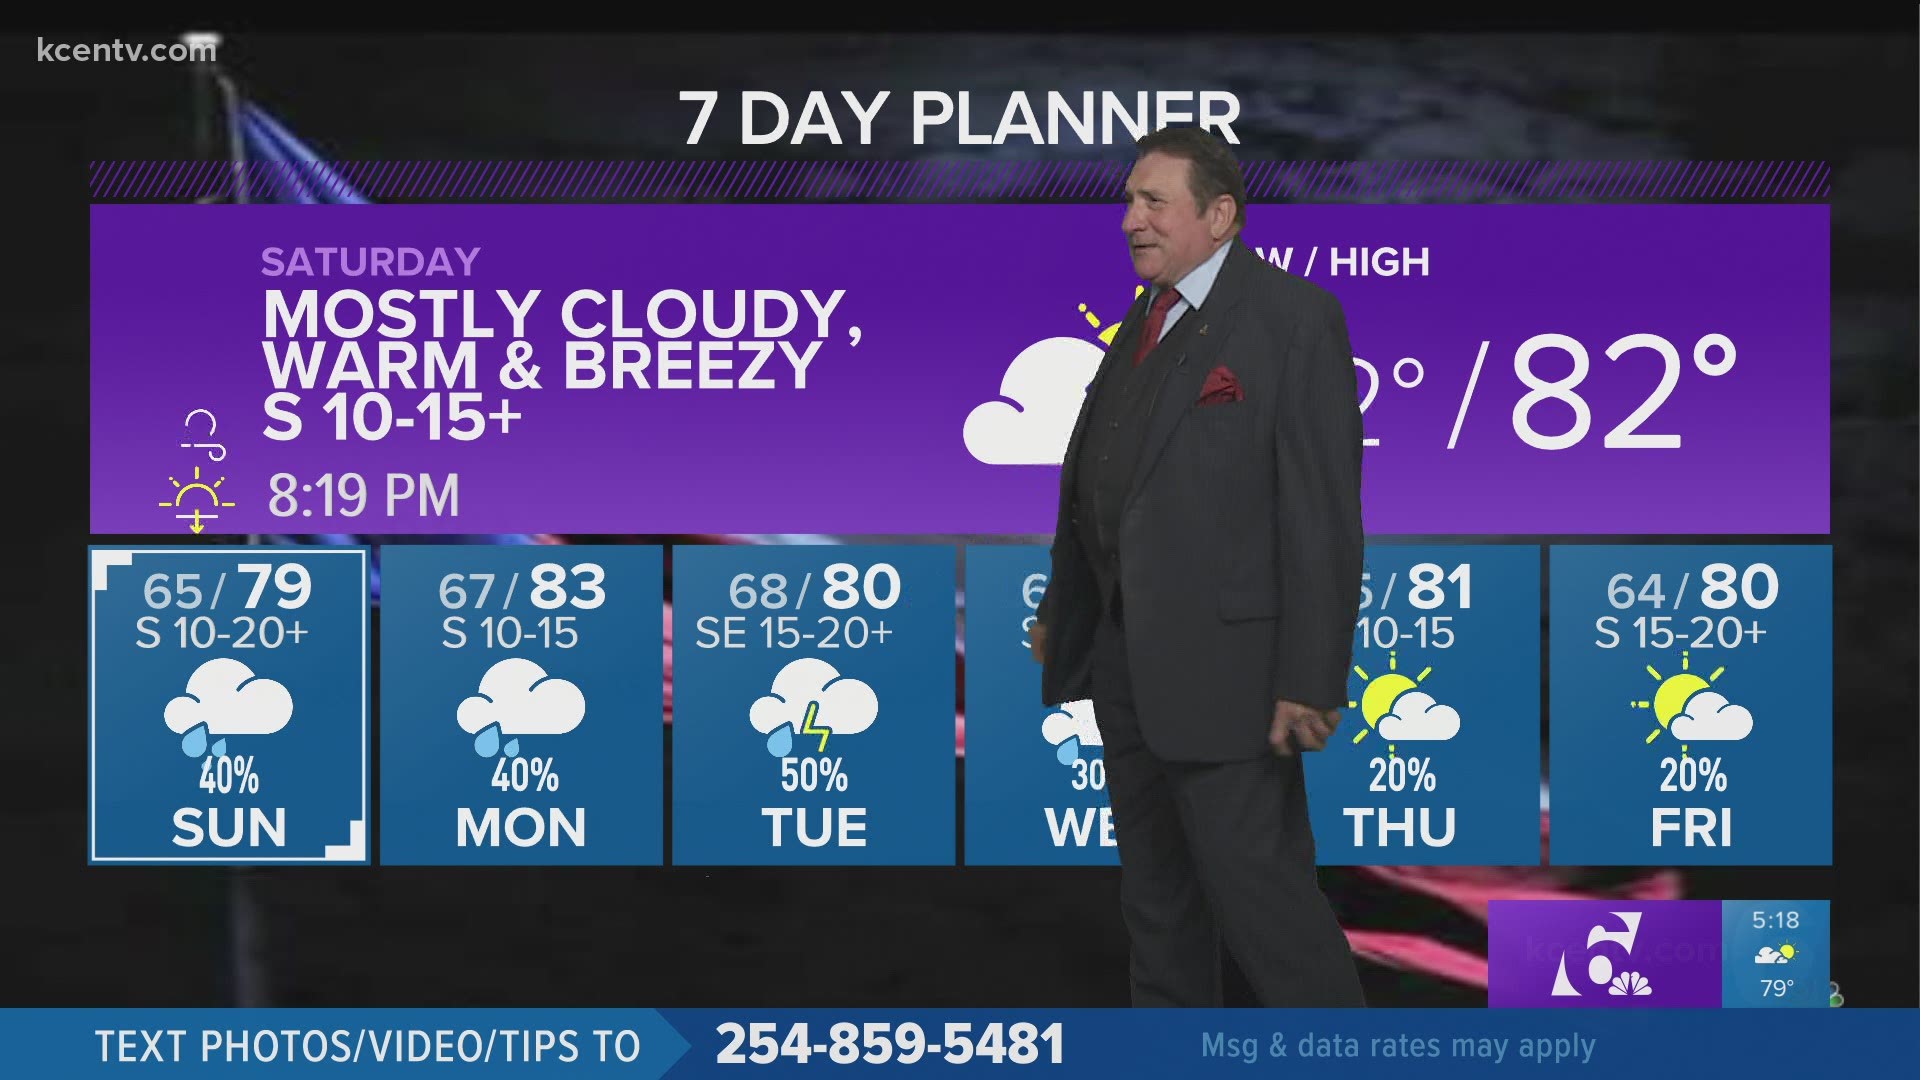 Weekend weather forecast for Central Texas | kcentv.com